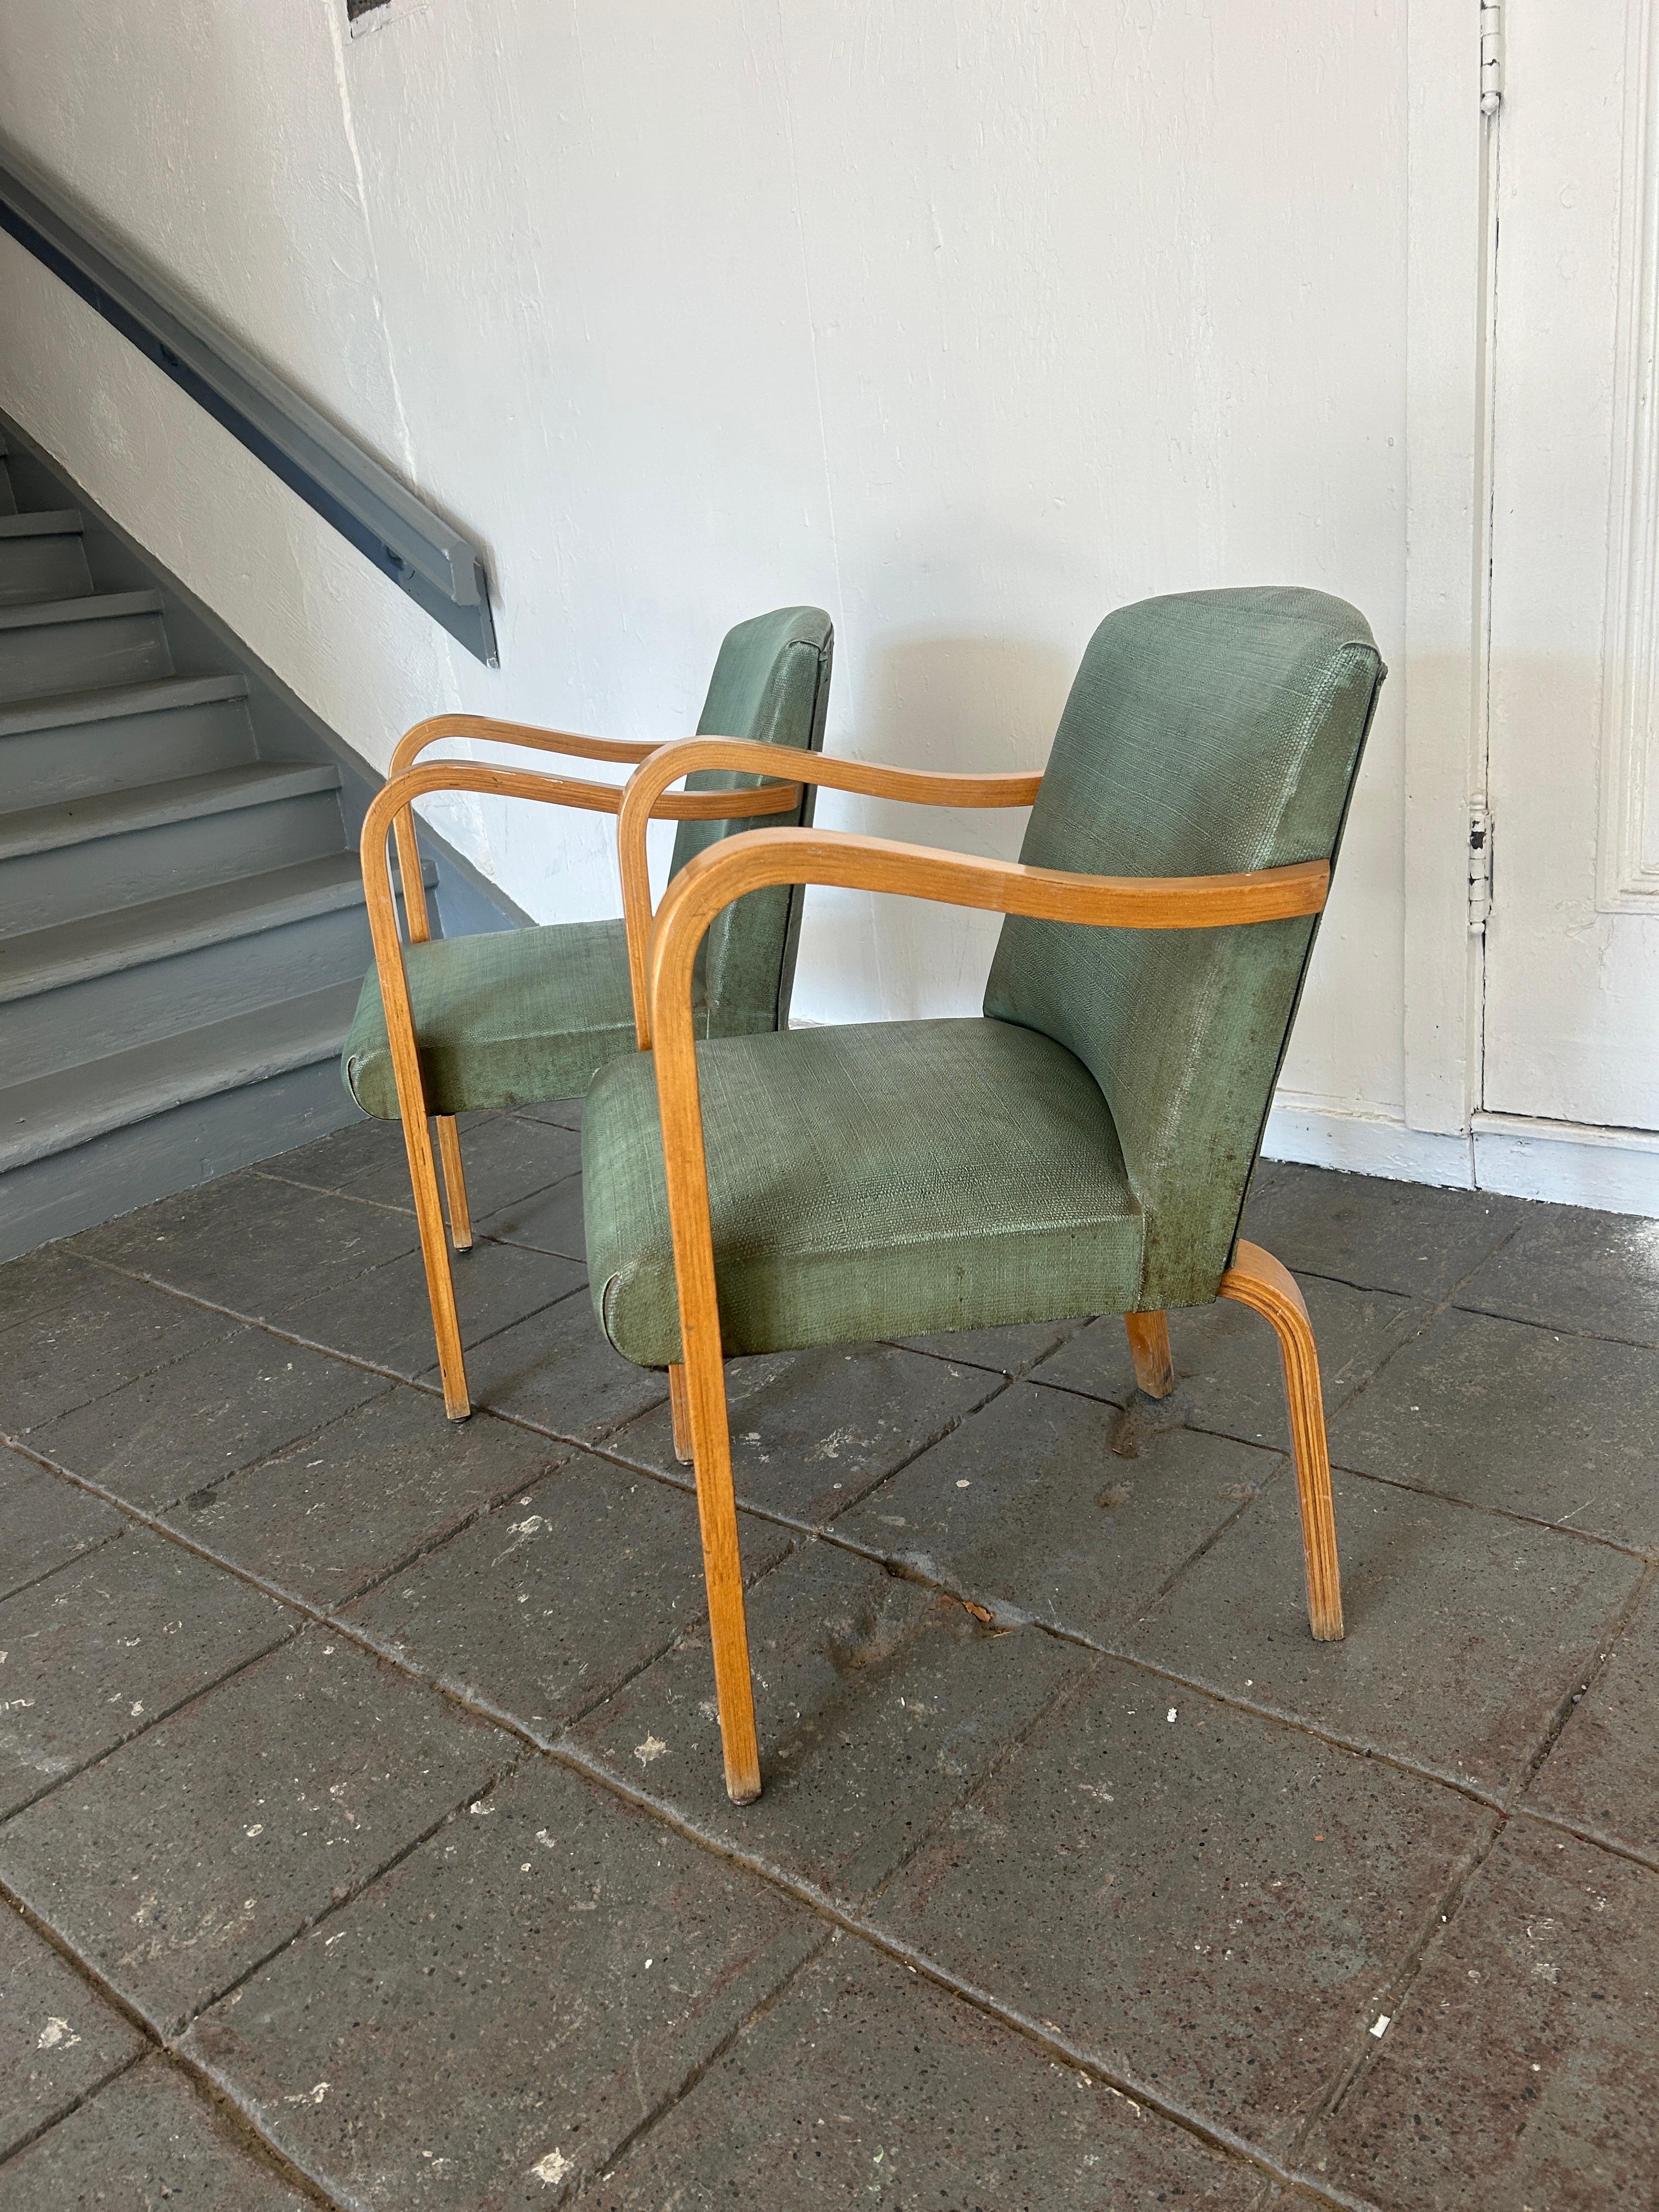 Pair of Mid-Century Modern Thonet bentwood birch arm chairs. Has original worn Light blue textured vinyl upholstery. Worn vintage condition very structural  - Need reupholstering. Timeless chair design by Thonet. Curved birch bentwood arms. Chairs